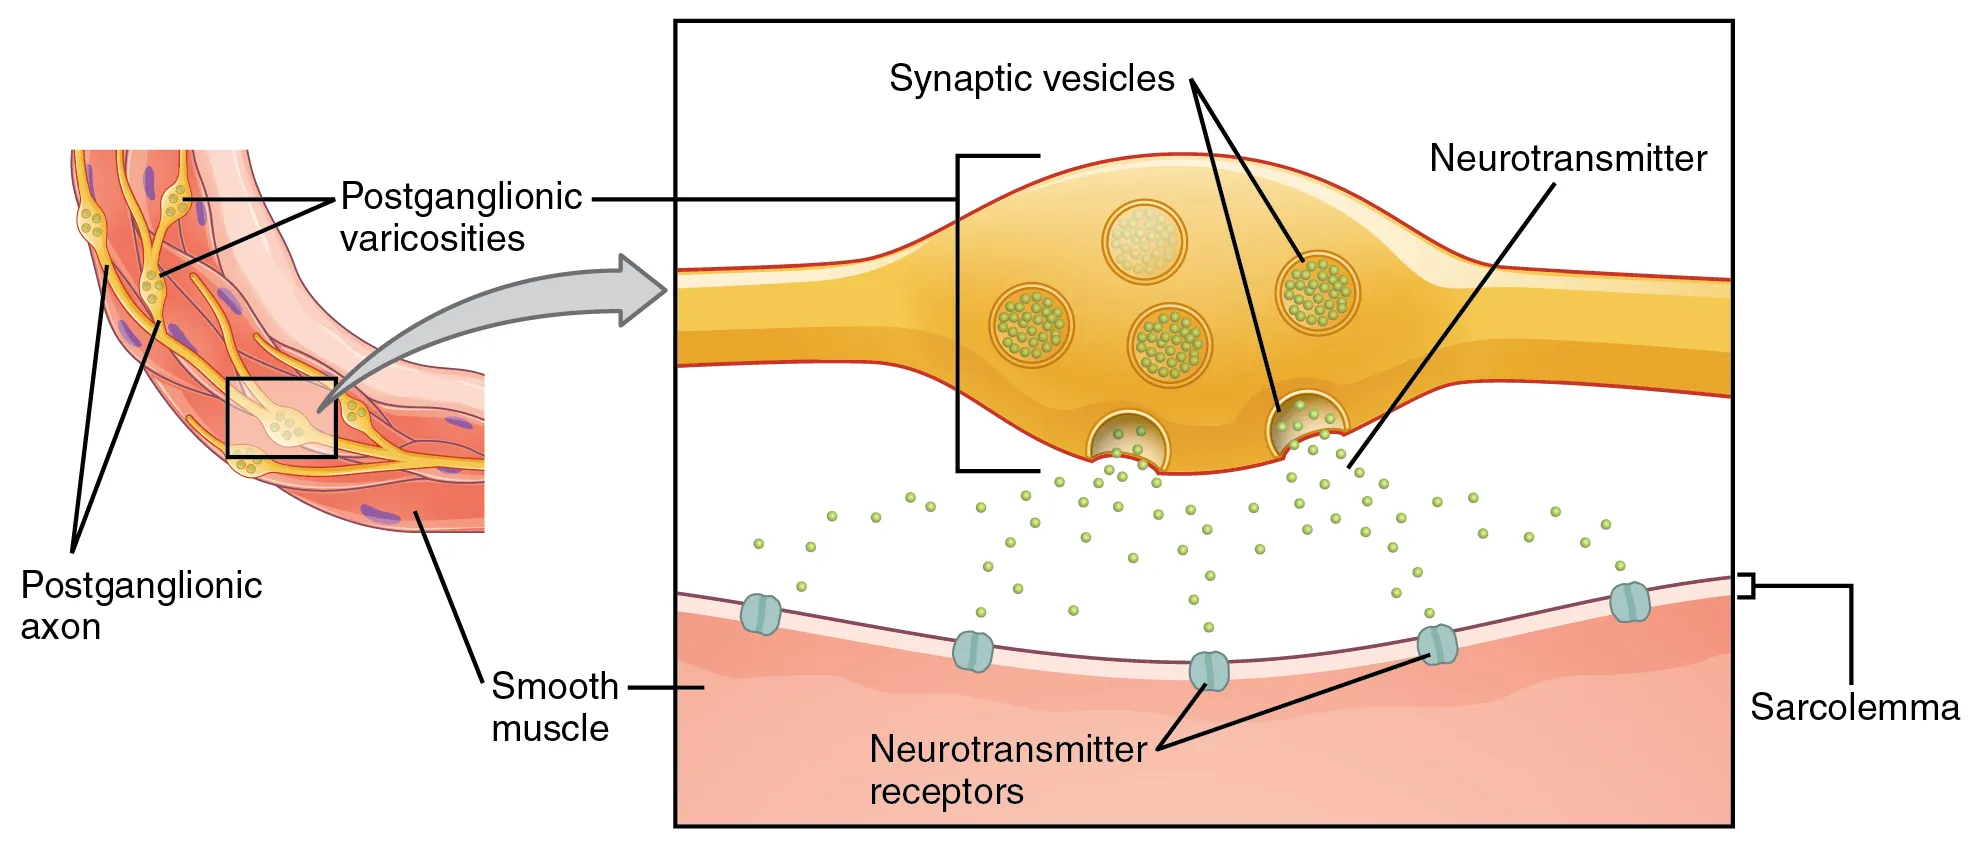 This figure shows the connection between autonomic fibers and the target effectors. The left image shows a slice of smooth muscle with the postganglionic varicosities and the postganglionic axons labeled. The right panel shows a magnified view of the synaptic vesicles, neurotransmitters, and the sarcolemma.